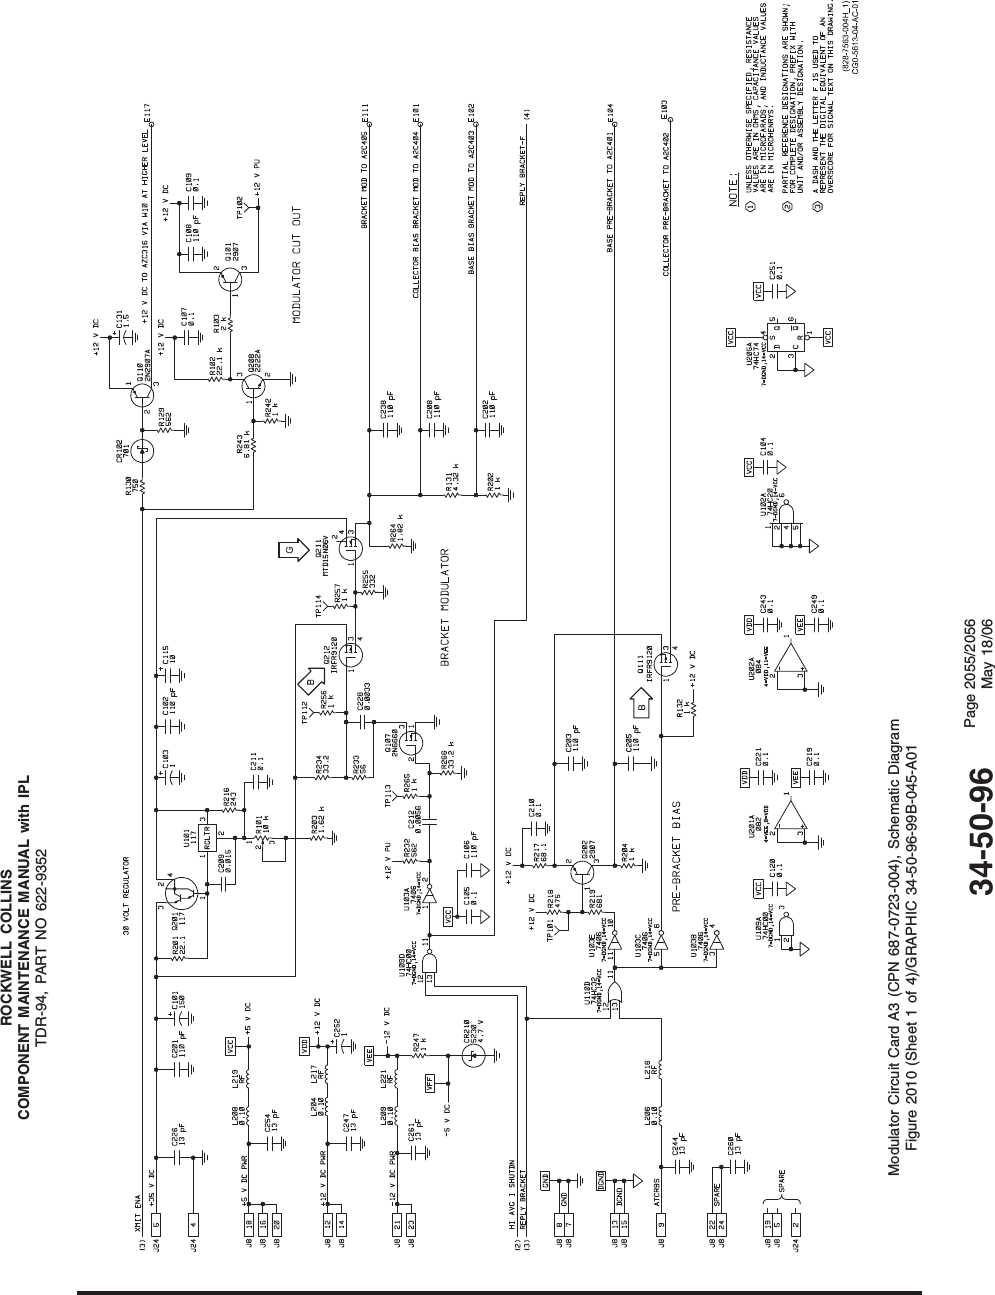 ROCKWELL COLLINSCOMPONENT MAINTENANCE MANUAL with IPLTDR-94, PART NO 622-9352Modulator Circuit Card A3 (CPN 687-0723-004), Schematic DiagramFigure 2010 (Sheet 1 of 4)/GRAPHIC 34-50-96-99B-045-A0134-50-96 Page 2055/2056May 18/06